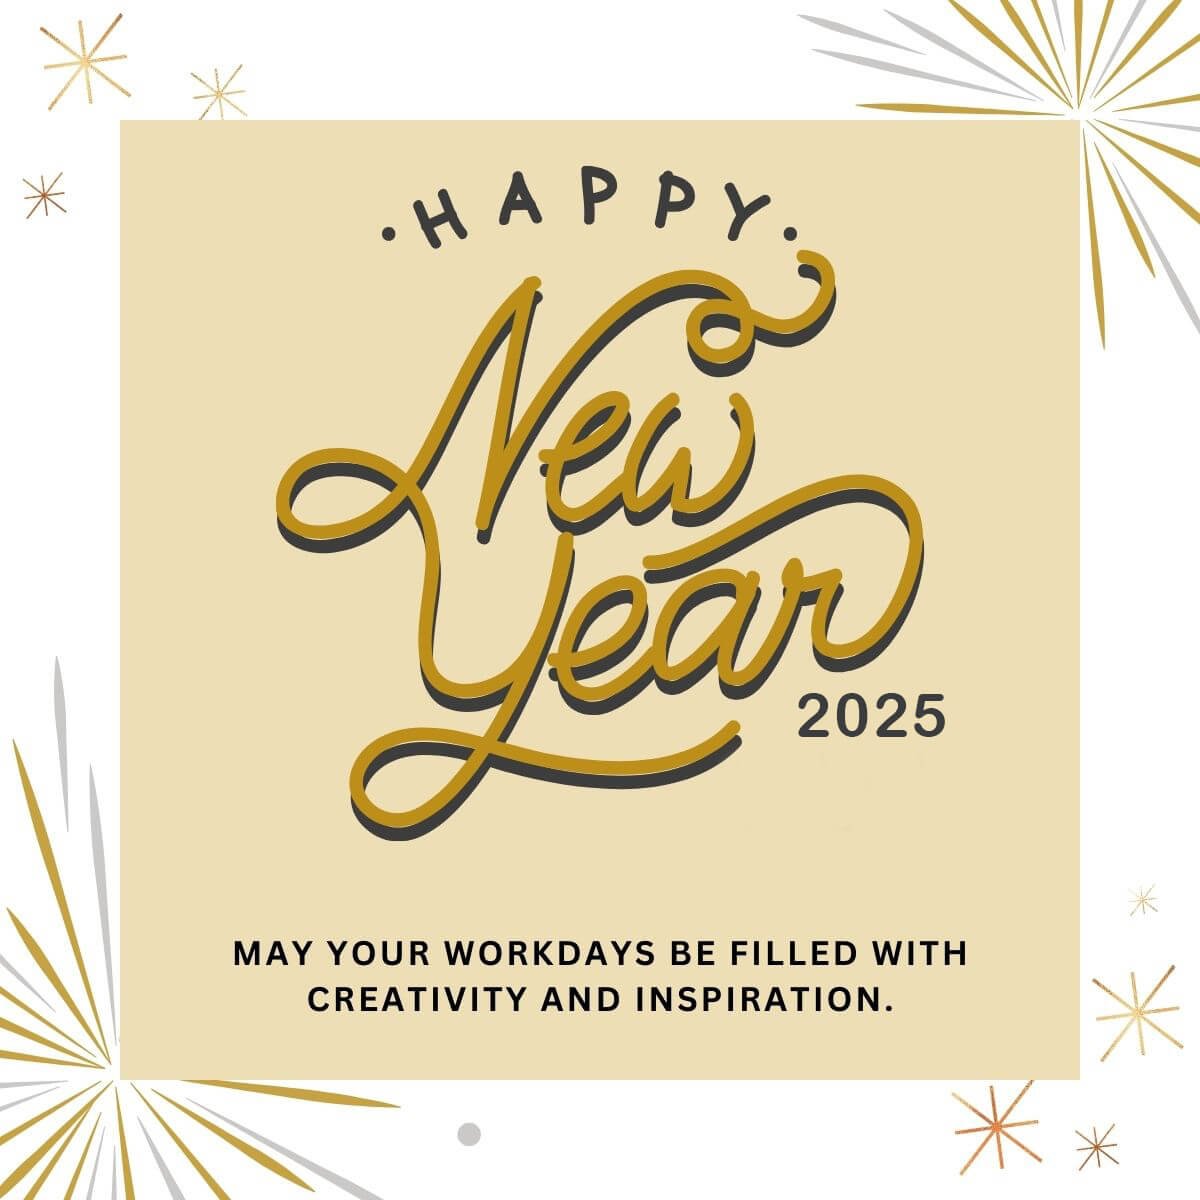 Minimalist New Year New Year Wishes For Coworkers 2025